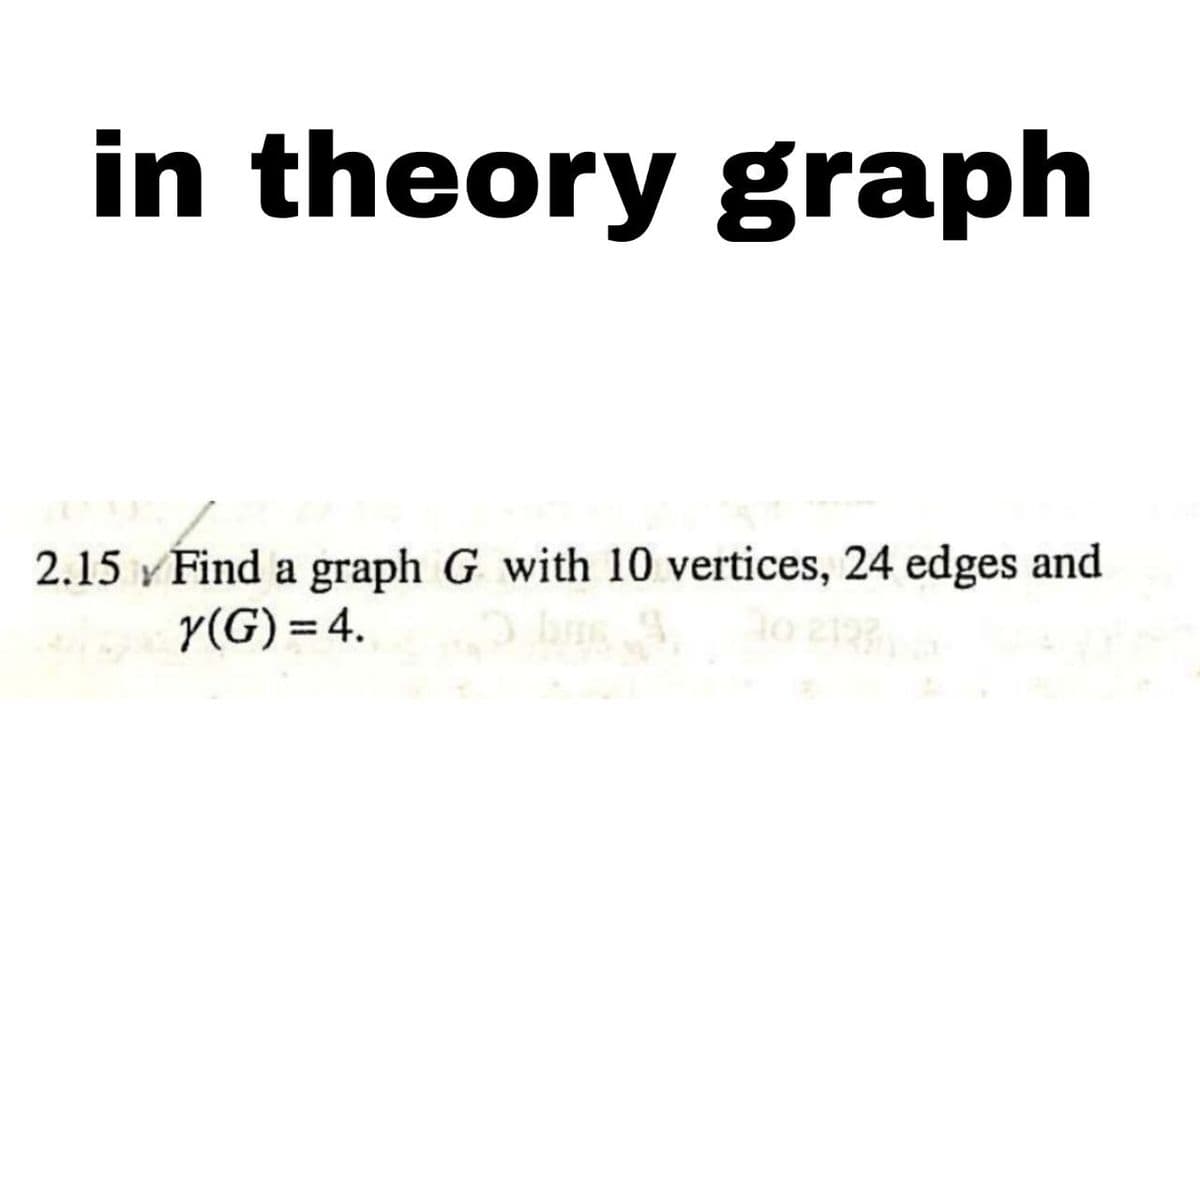 in theory graph
2.15 Find a graph G with 10 vertices, 24 edges and
10 21
Y(G) = 4.